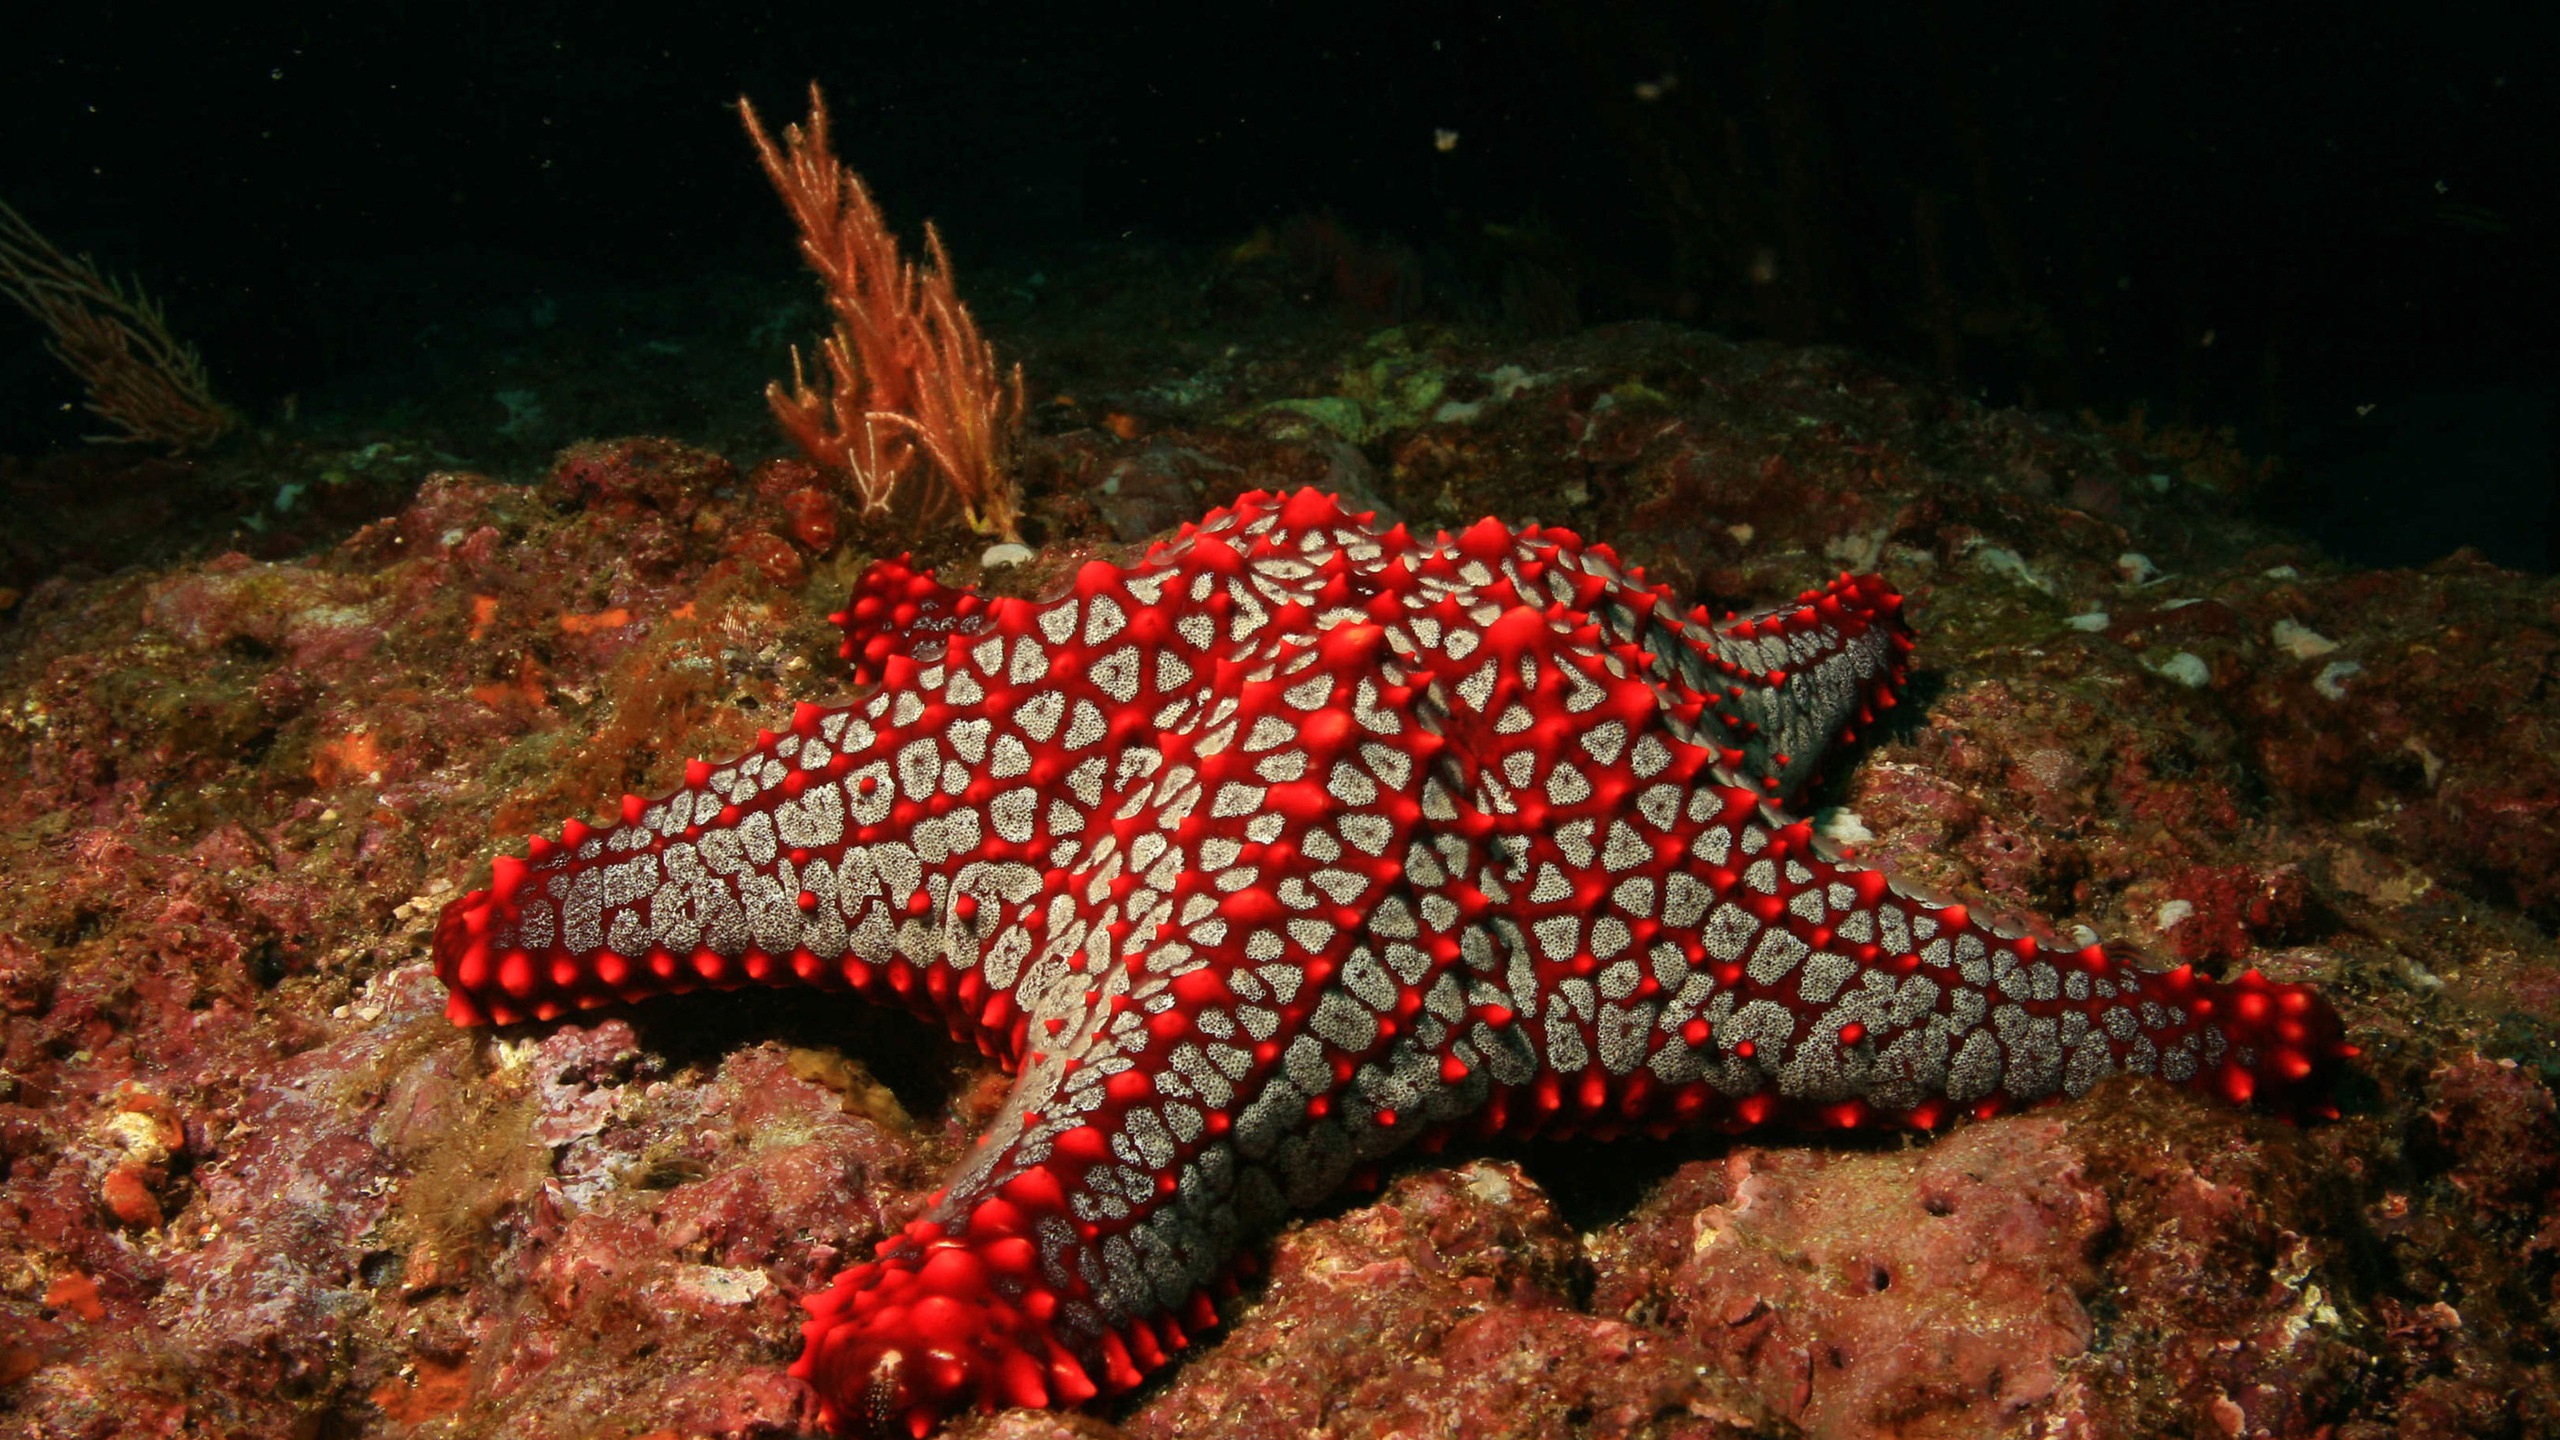 Red Sea Star for 2560x1440 HDTV resolution